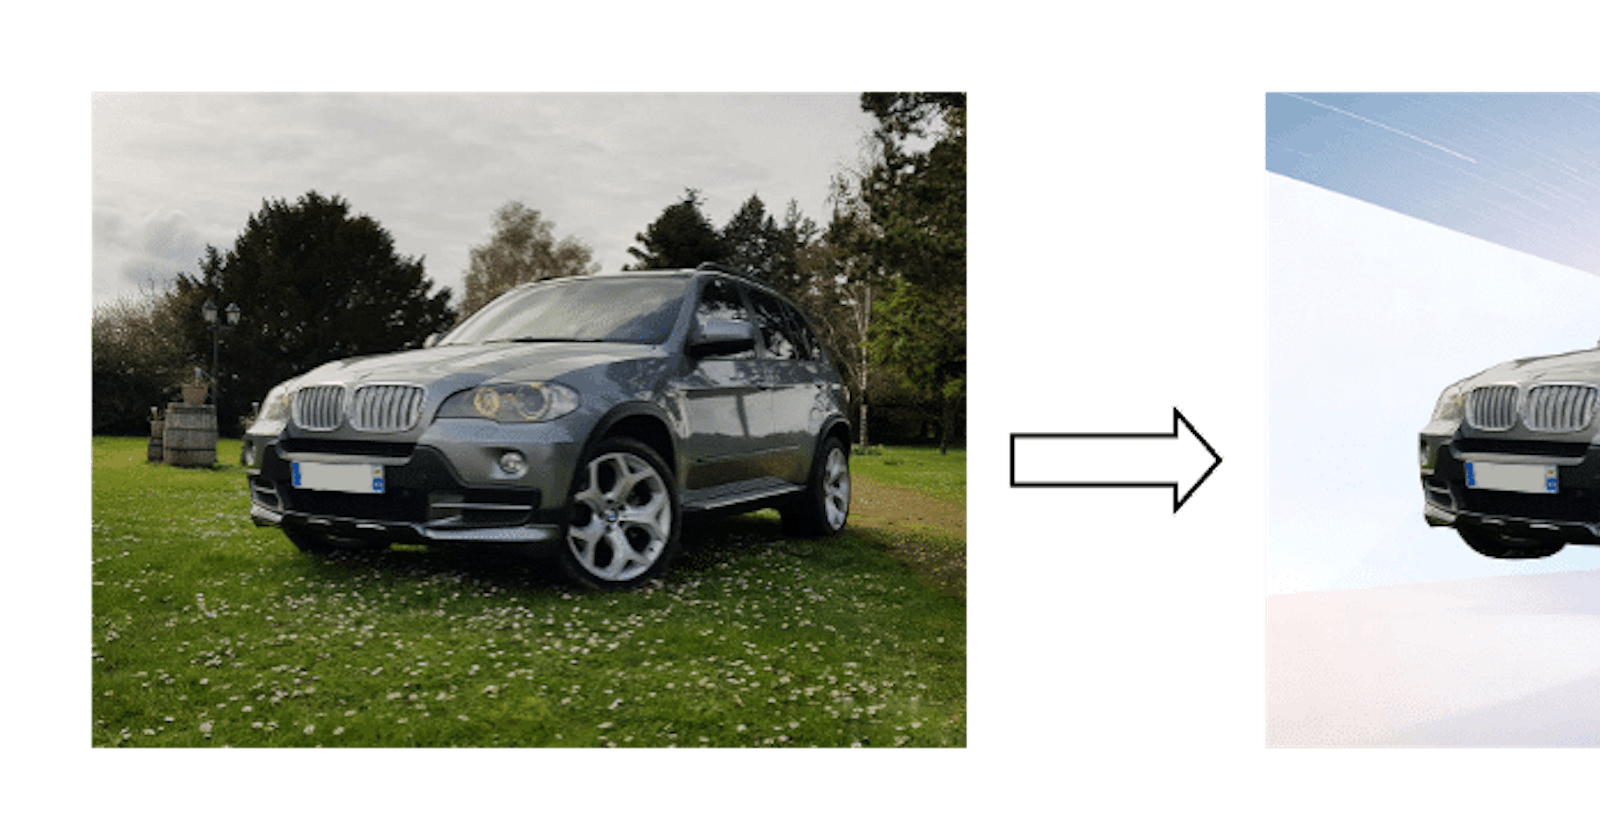 Background removal on car images - Machine learning project